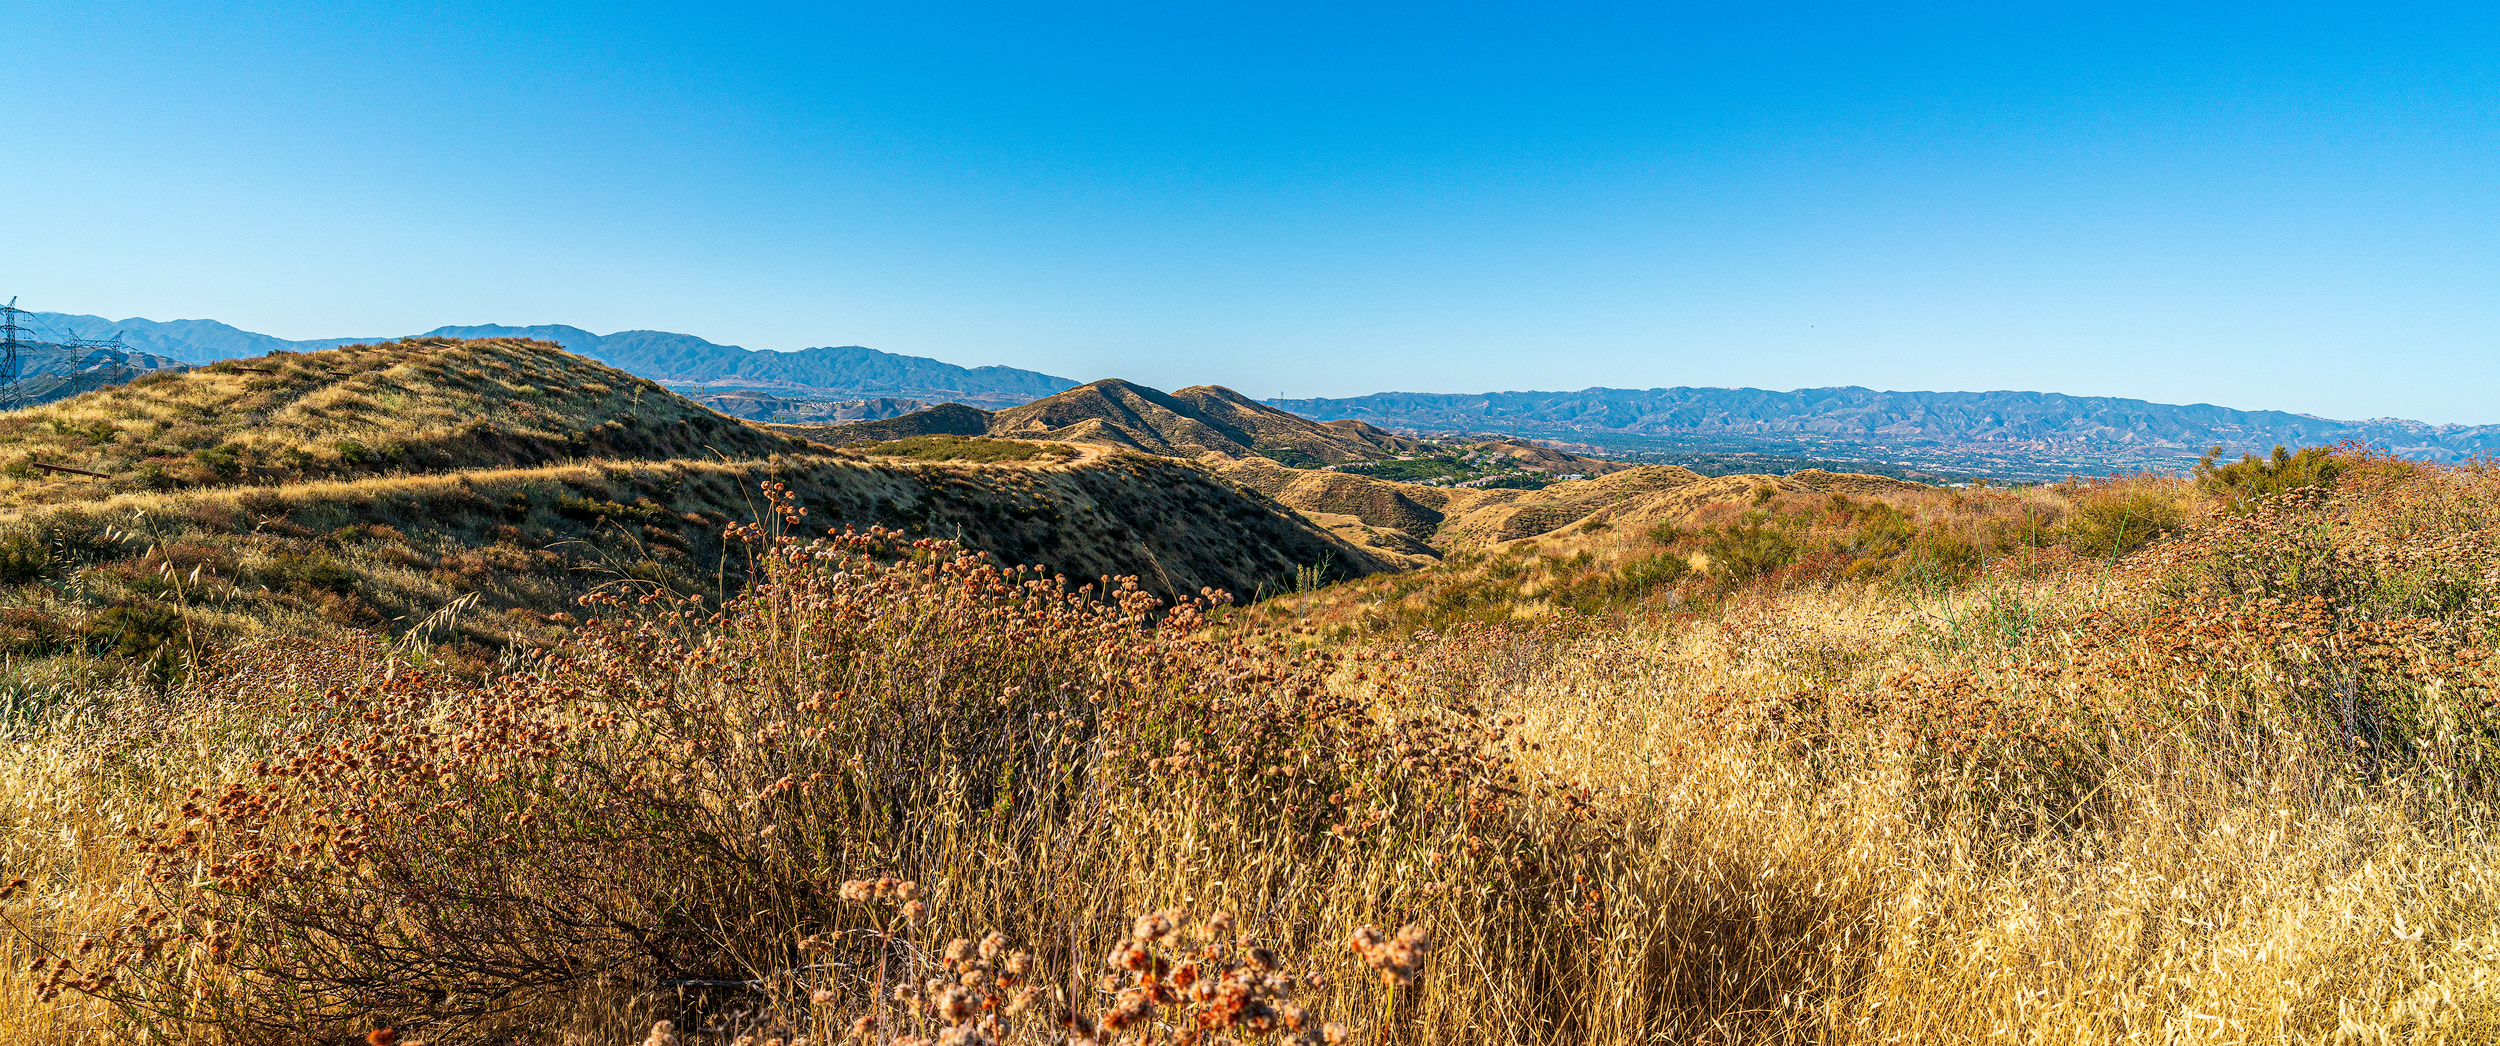 The Haskell Canyon Open Space